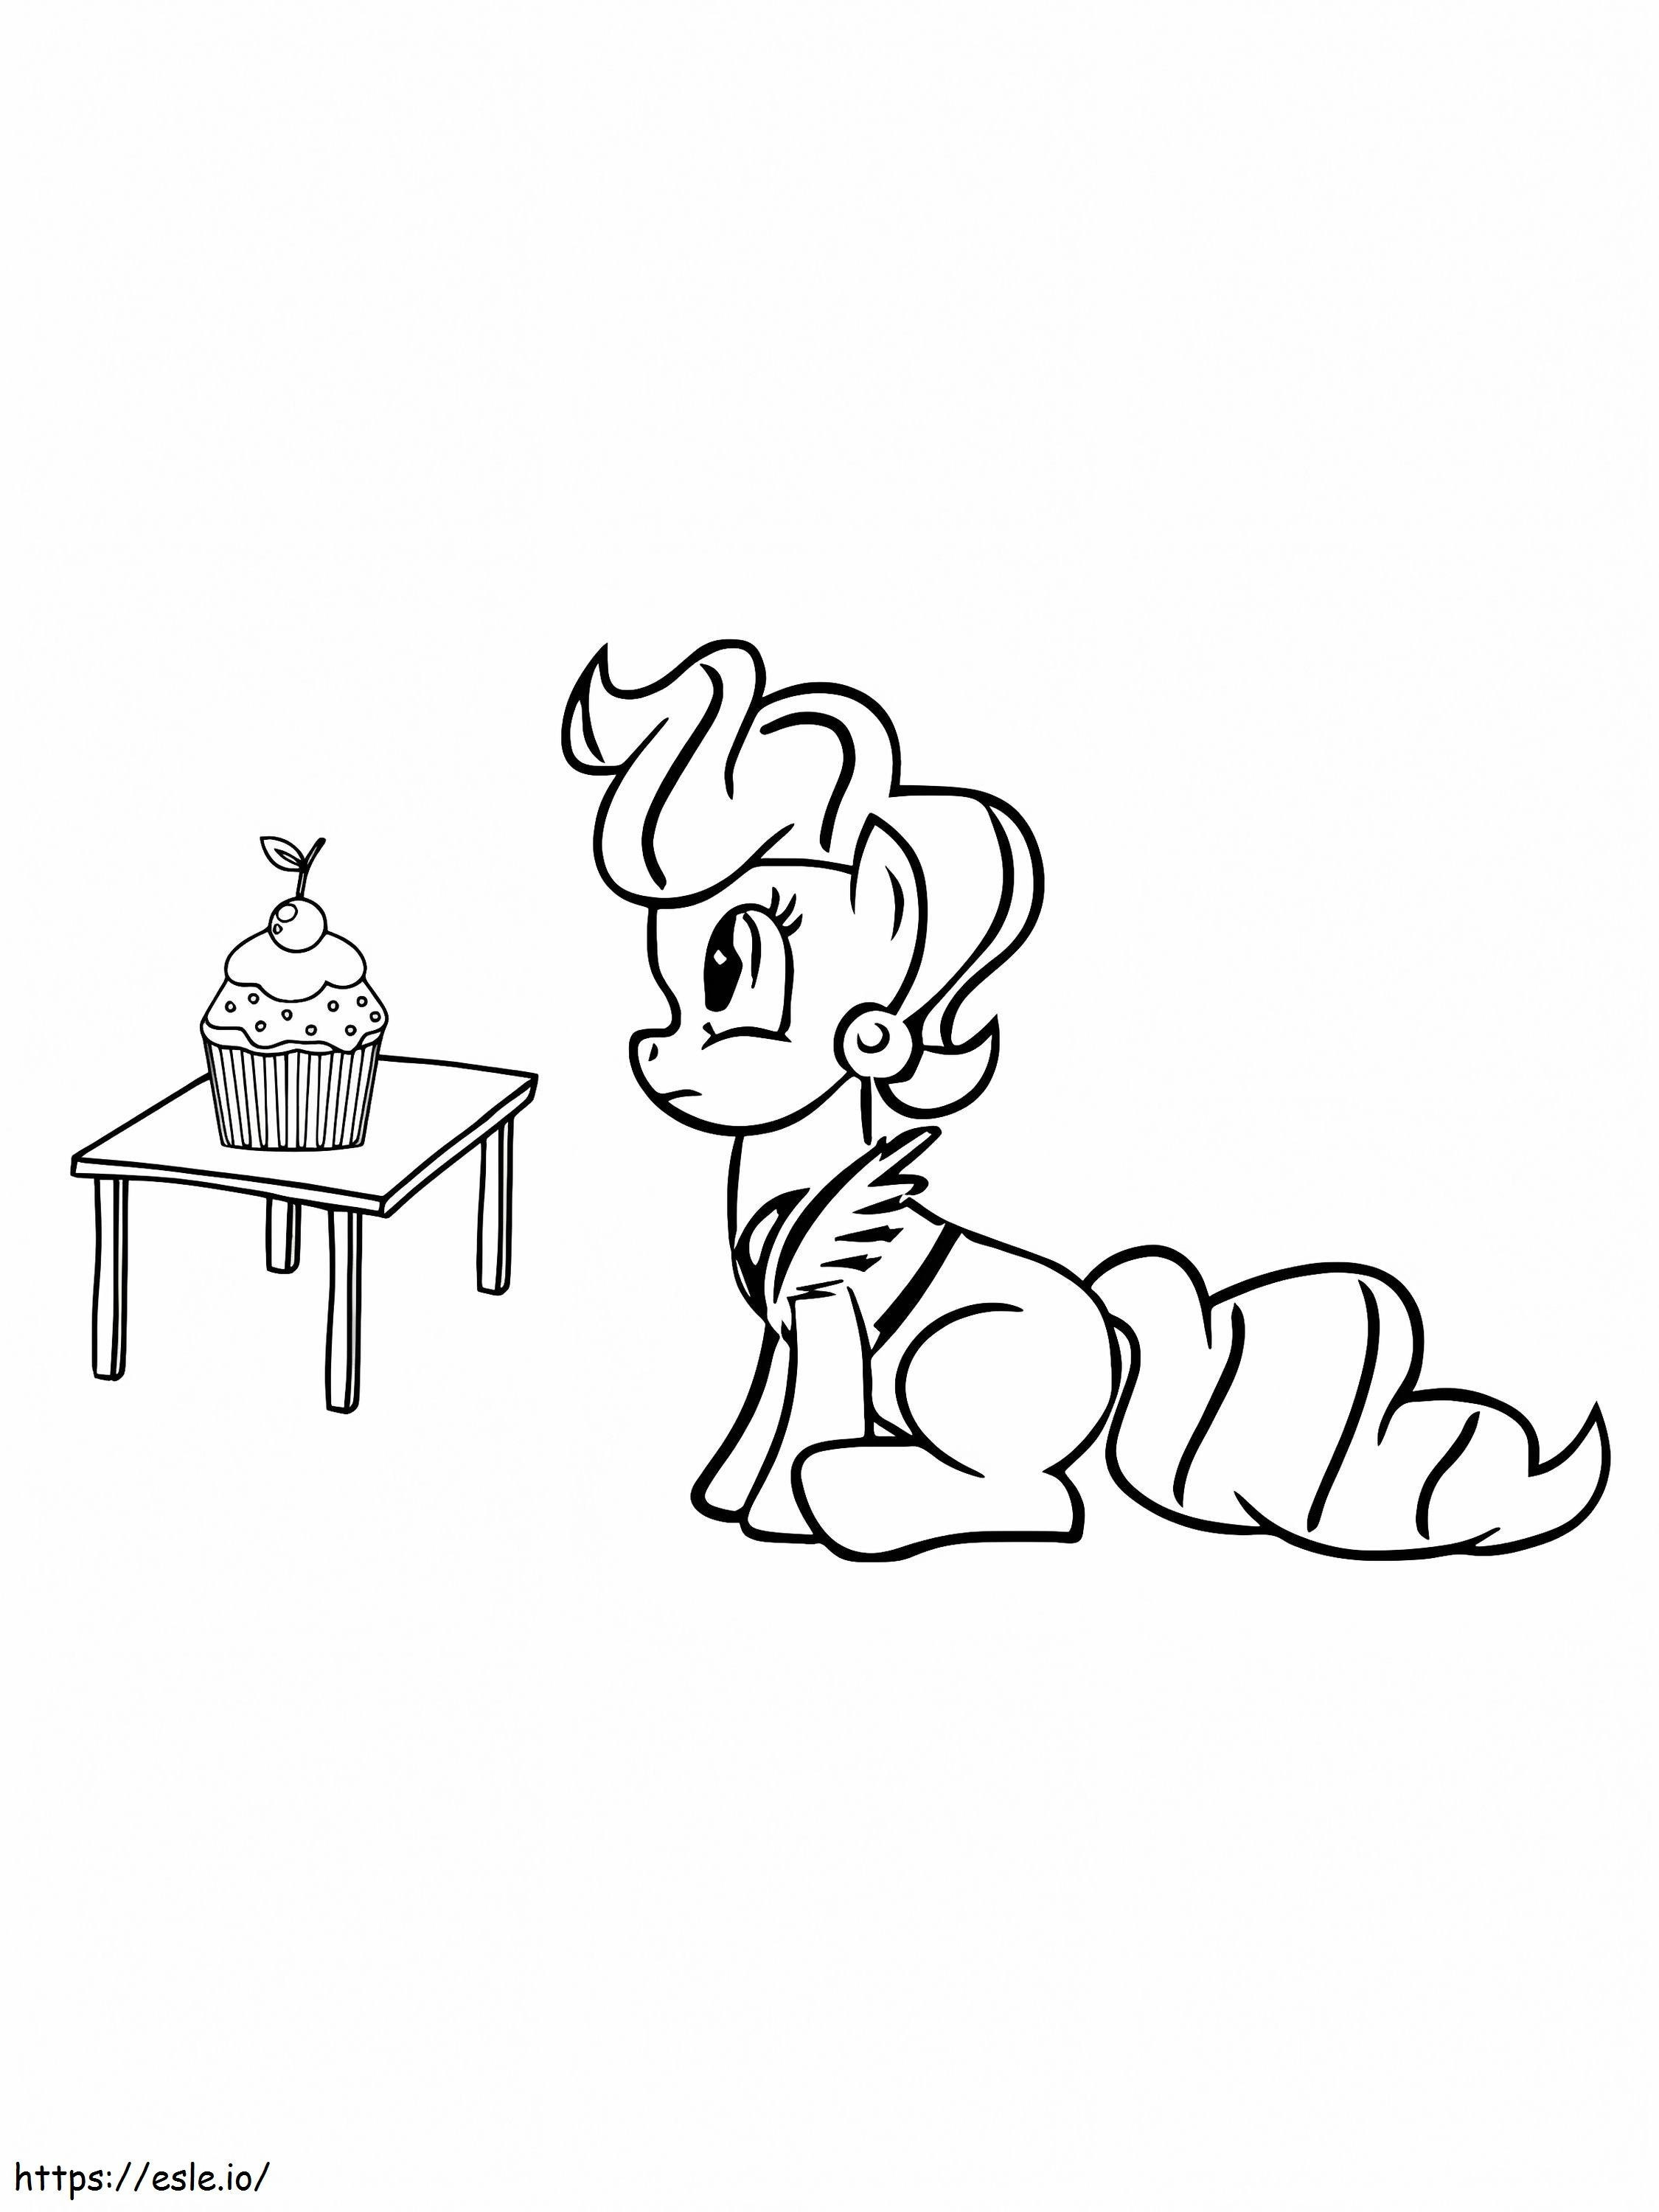 My Little Pony Mrs Cake And Cupcake On The Table coloring page